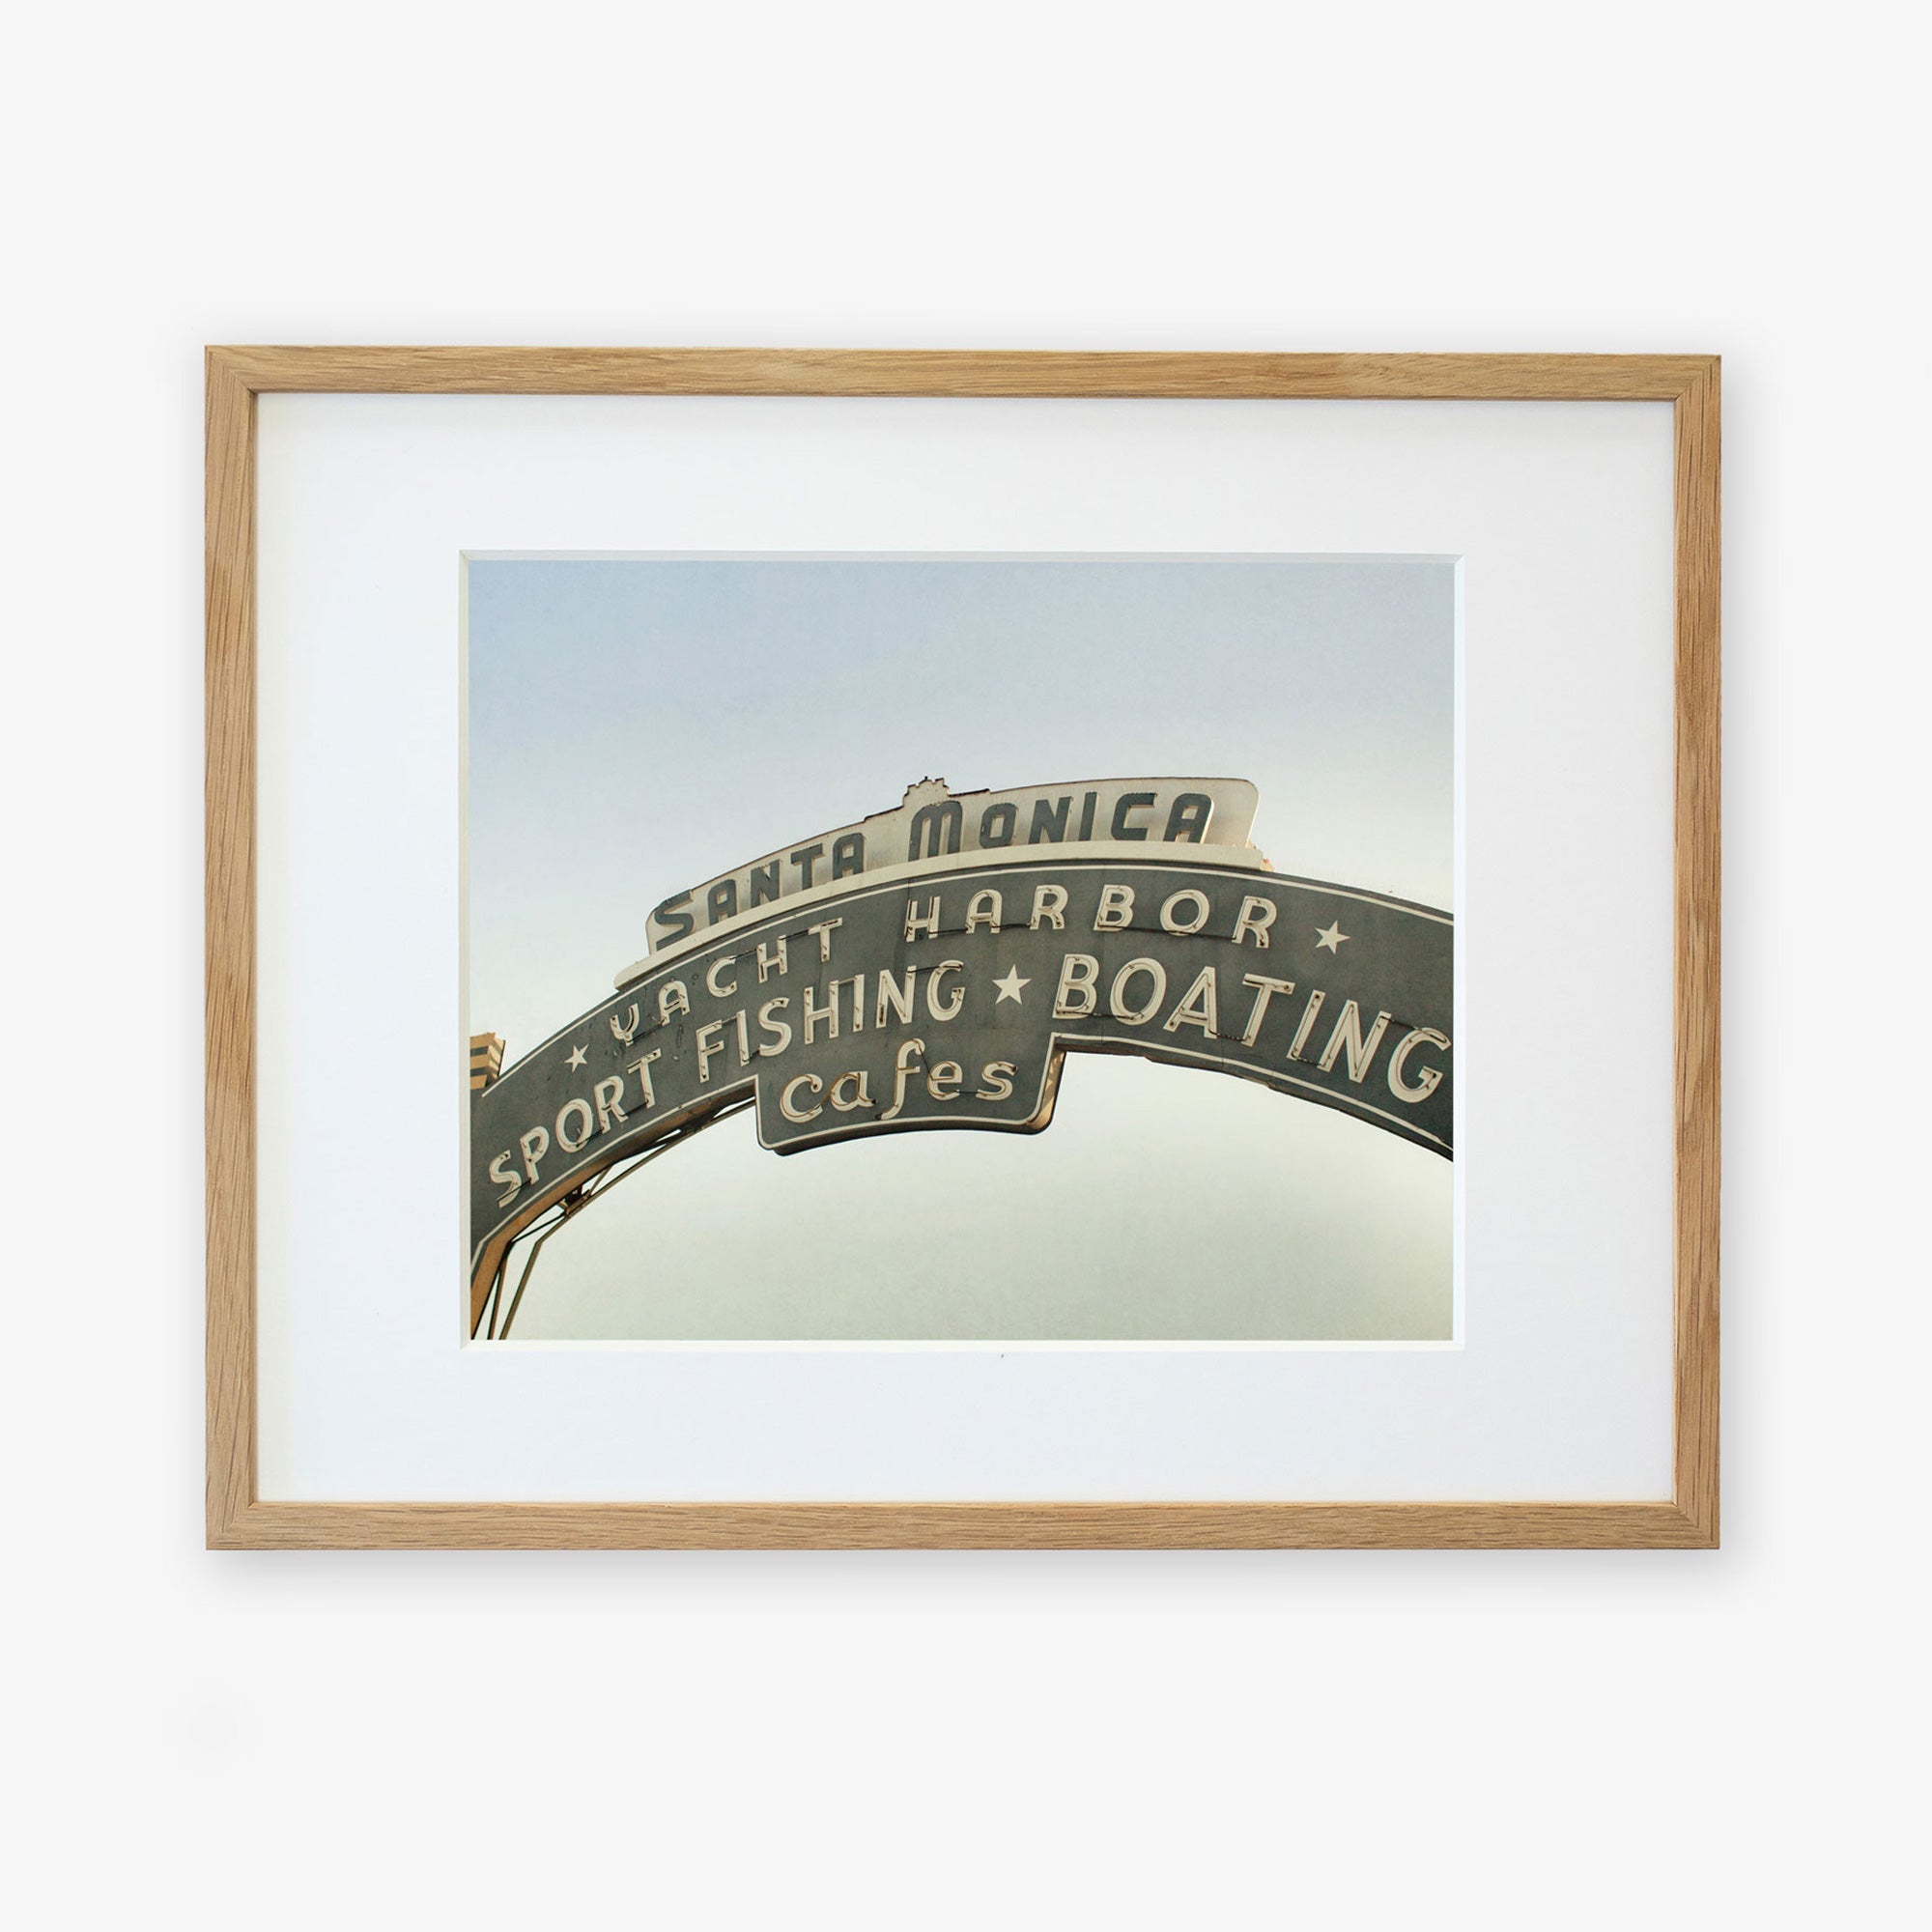 Framed archival photographic print of the Los Angeles California Print, 'Santa Monica Pier Blues' by Offley Green, featuring the iconic Santa Monica sign with text highlighting yacht harbor, sport fishing, boating, and cafes, displayed against a clear sky.